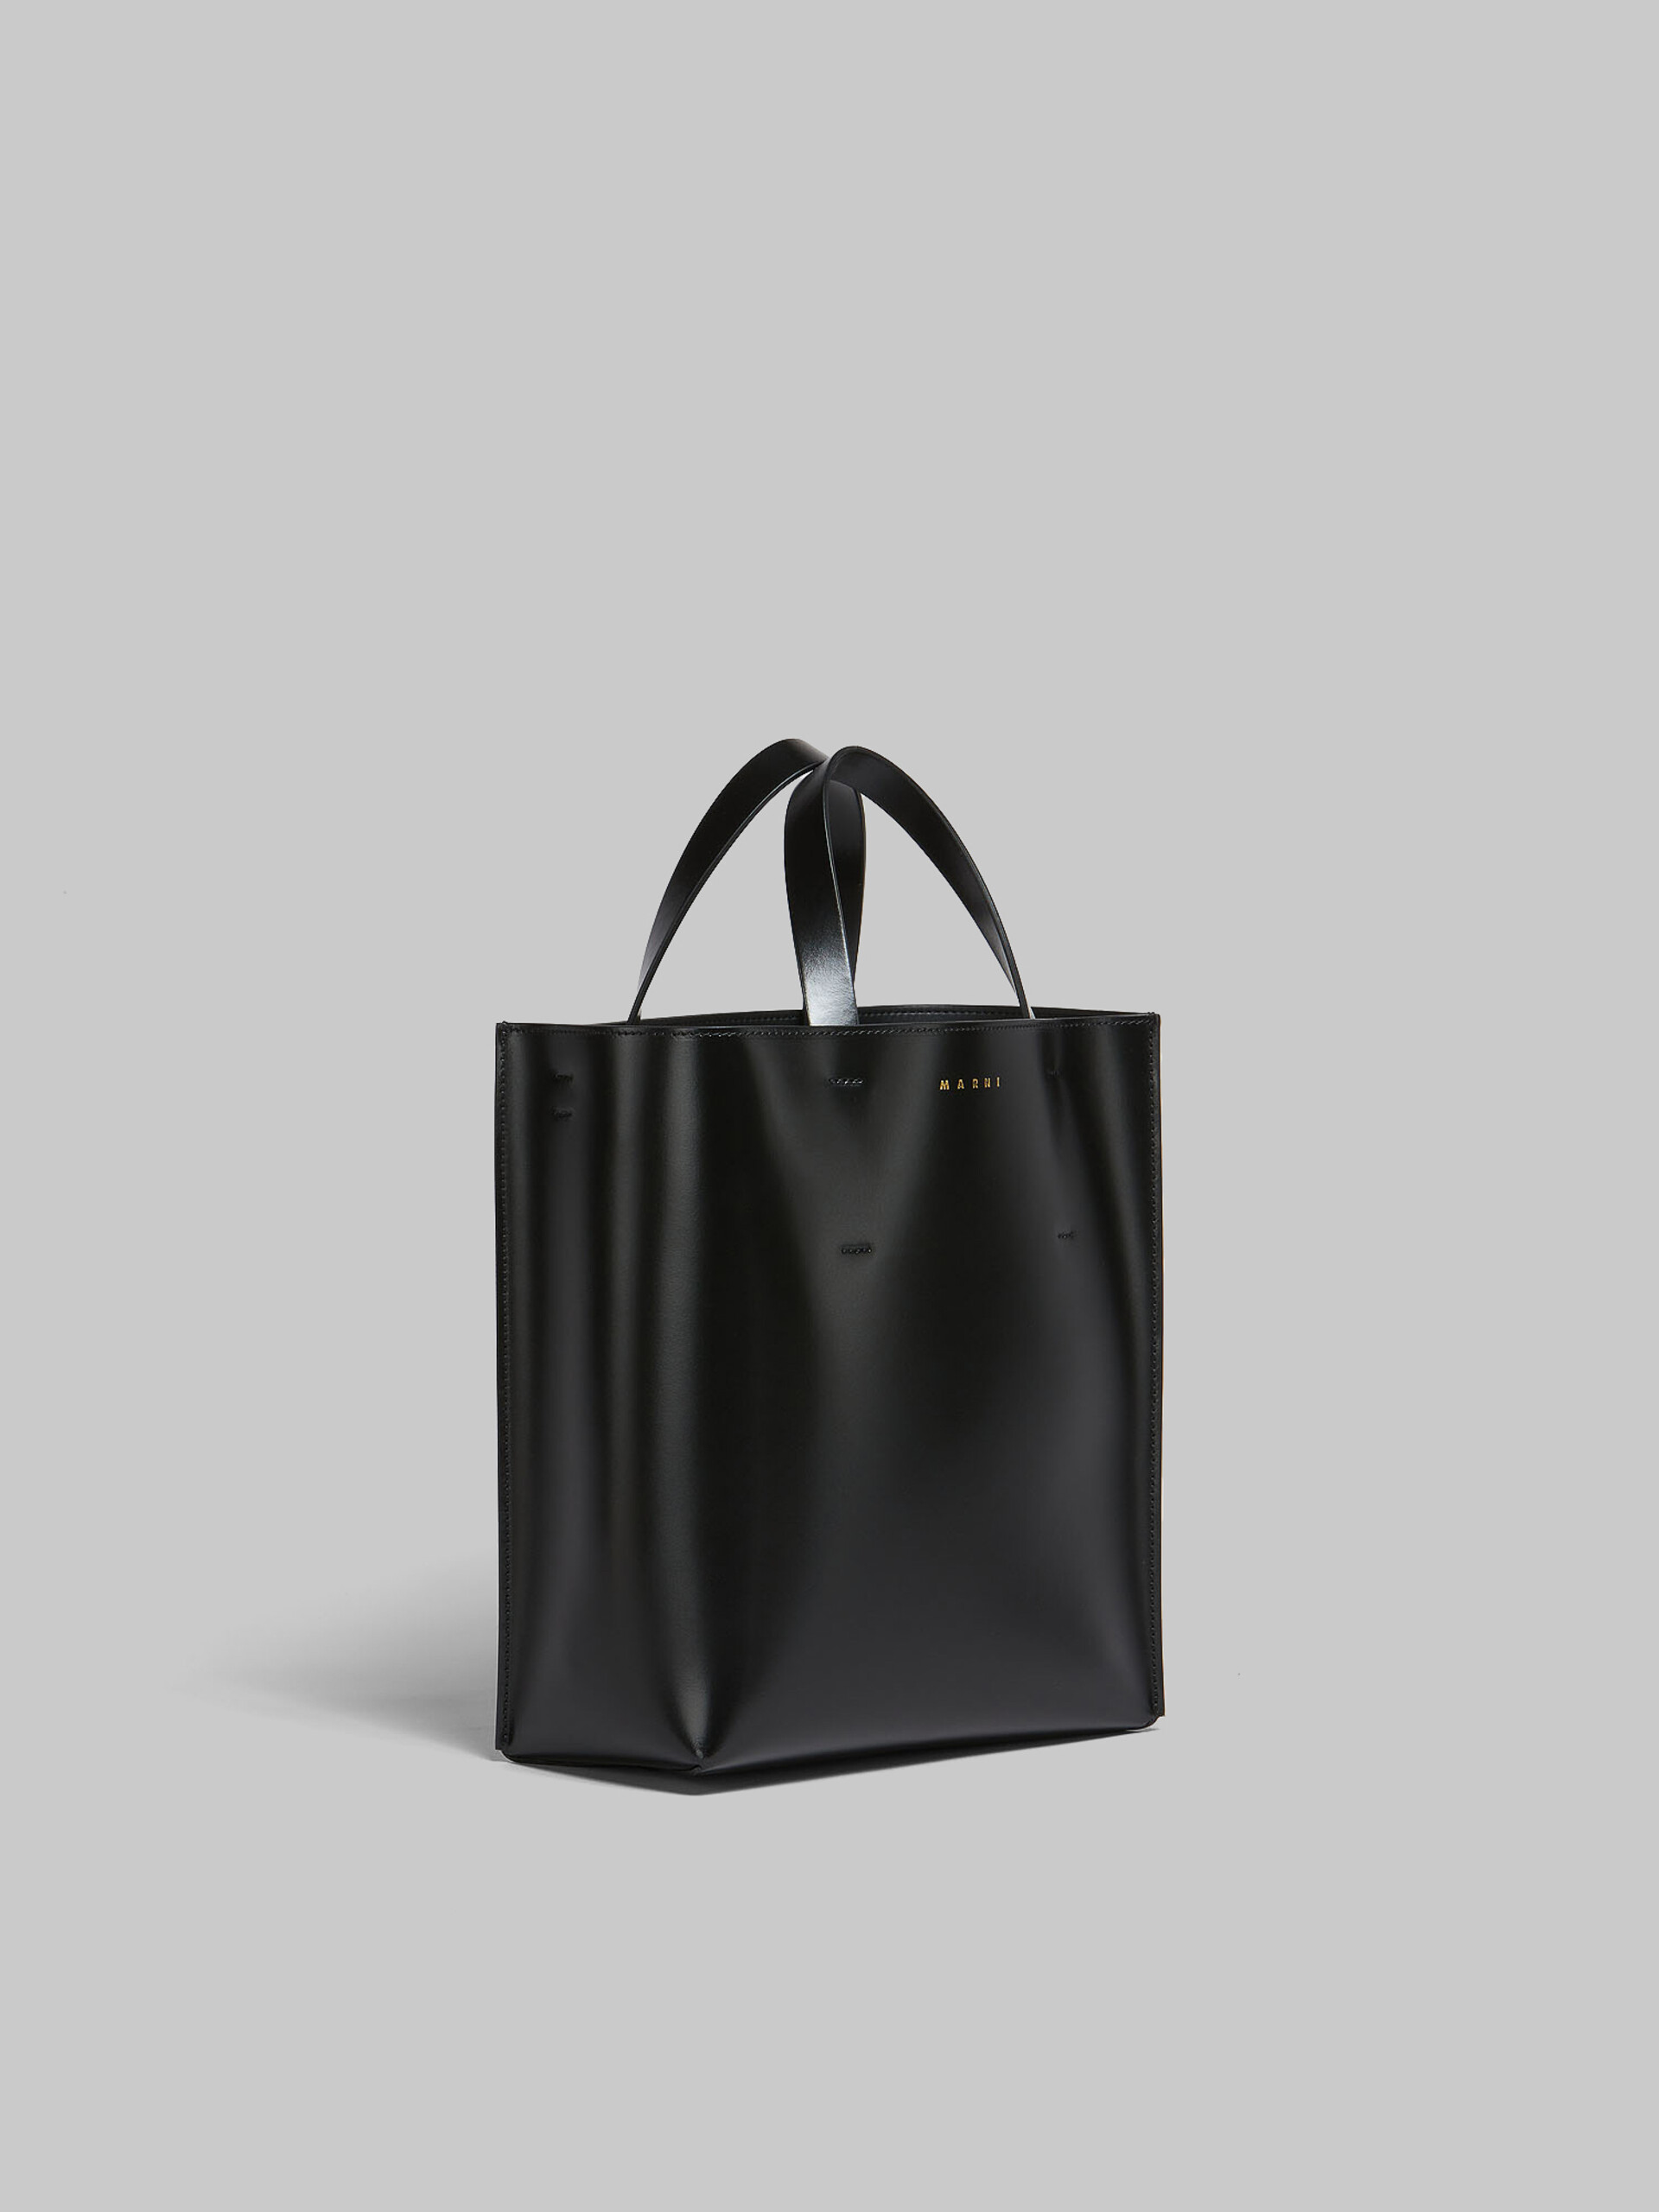 Museo small bag in black leather - Shopping Bags - Image 4